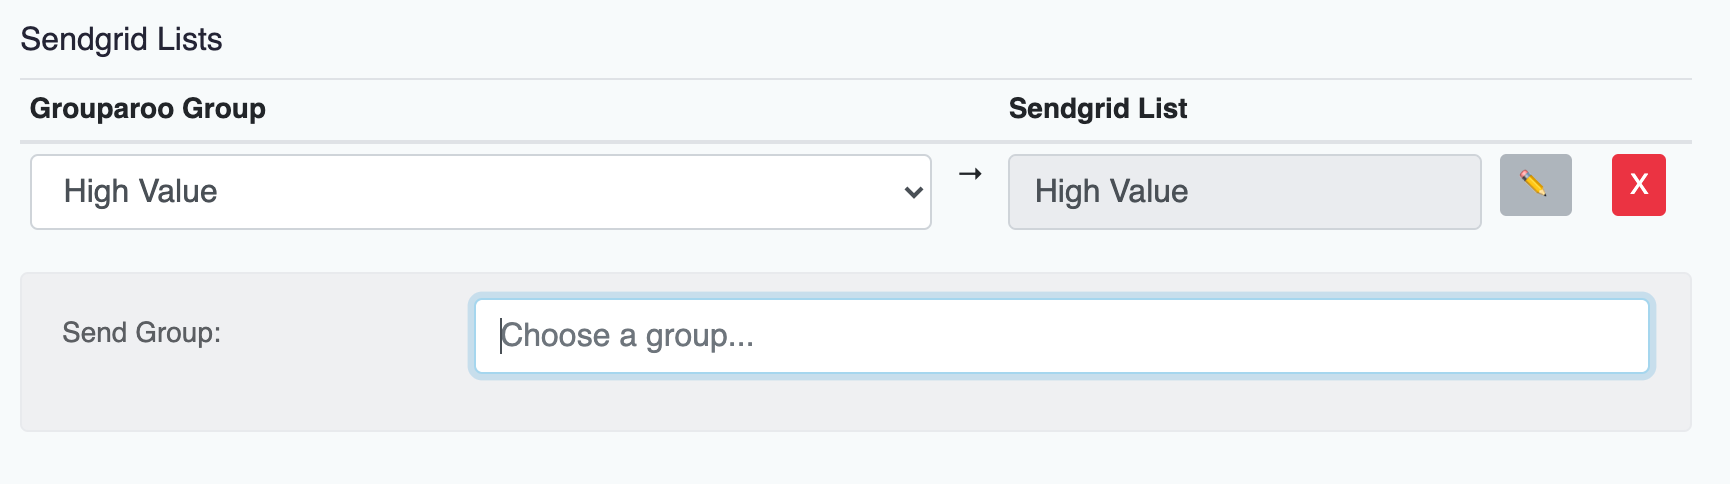 Sendgrid Export Contacts Group Data